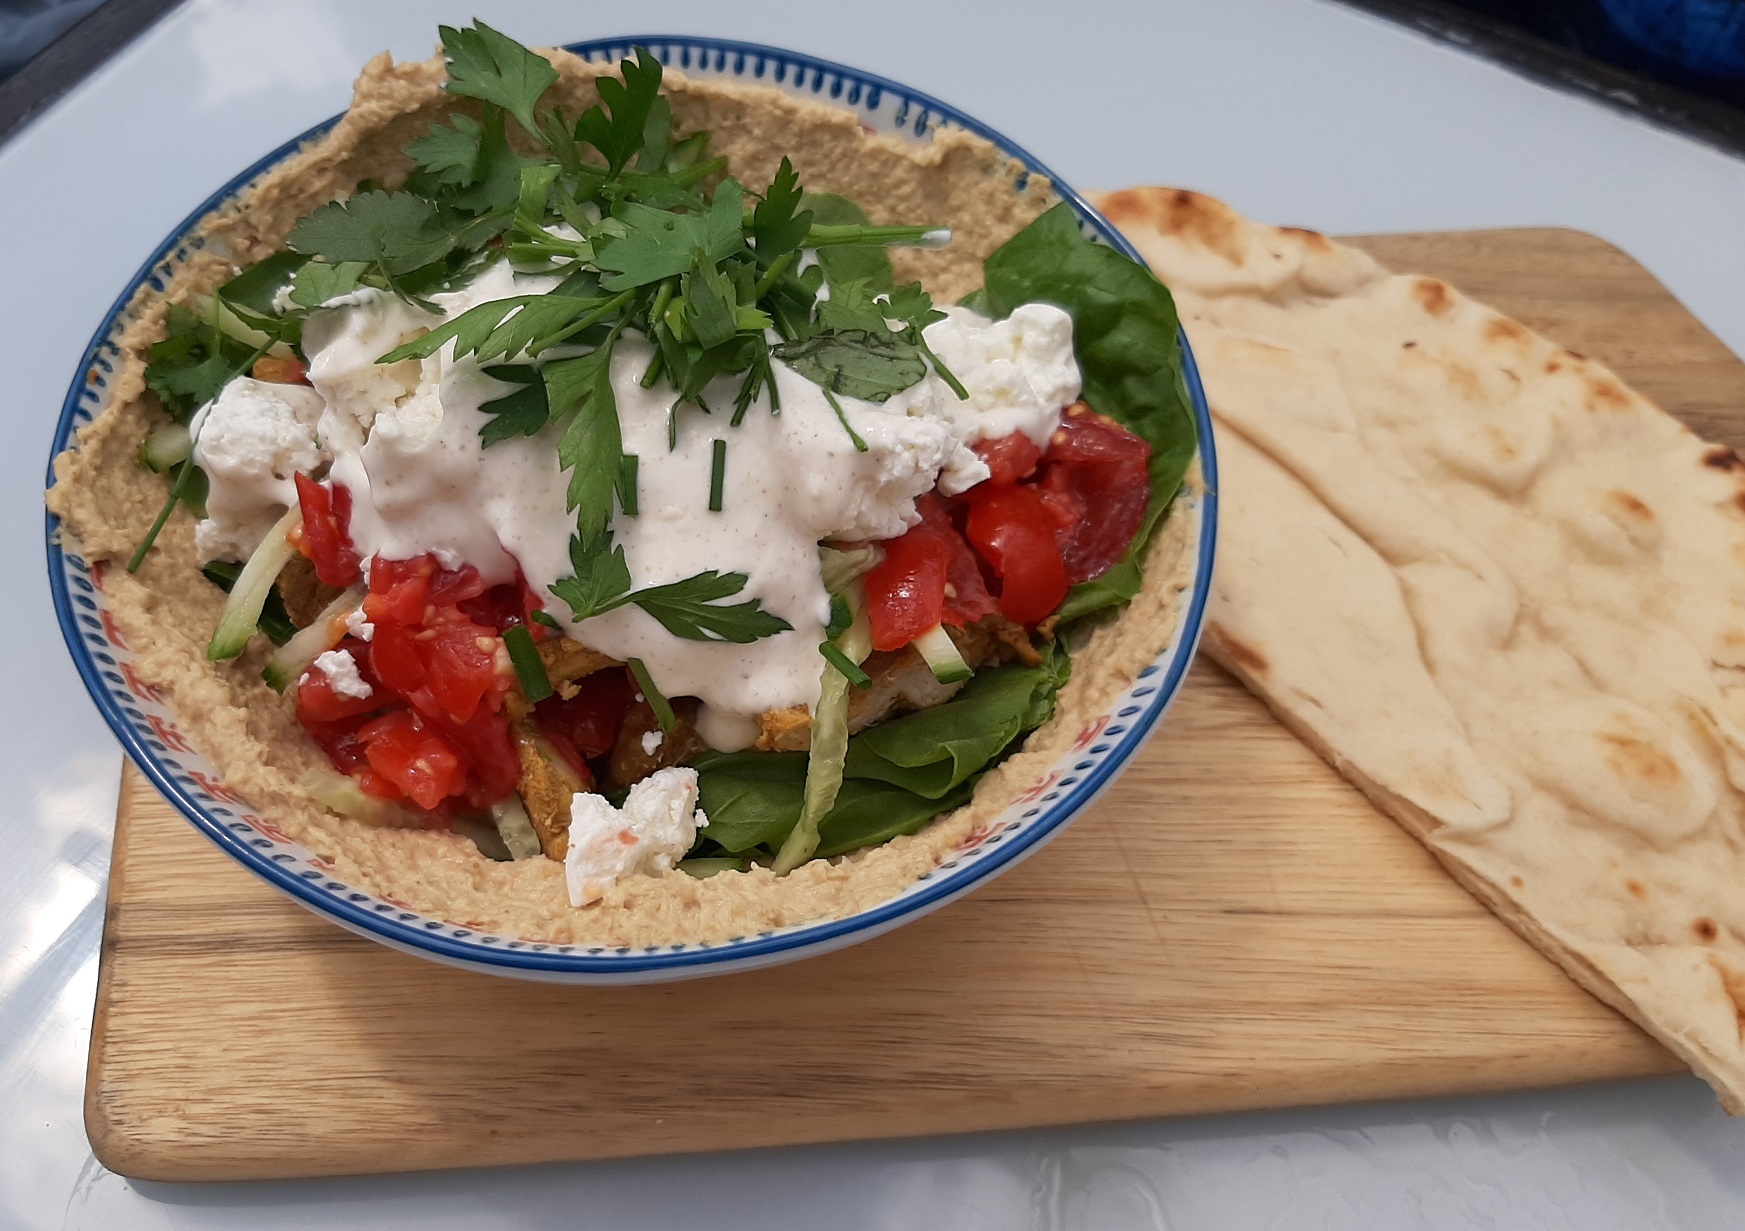 A hummus bowl topped with chicken shawarma and flatbread